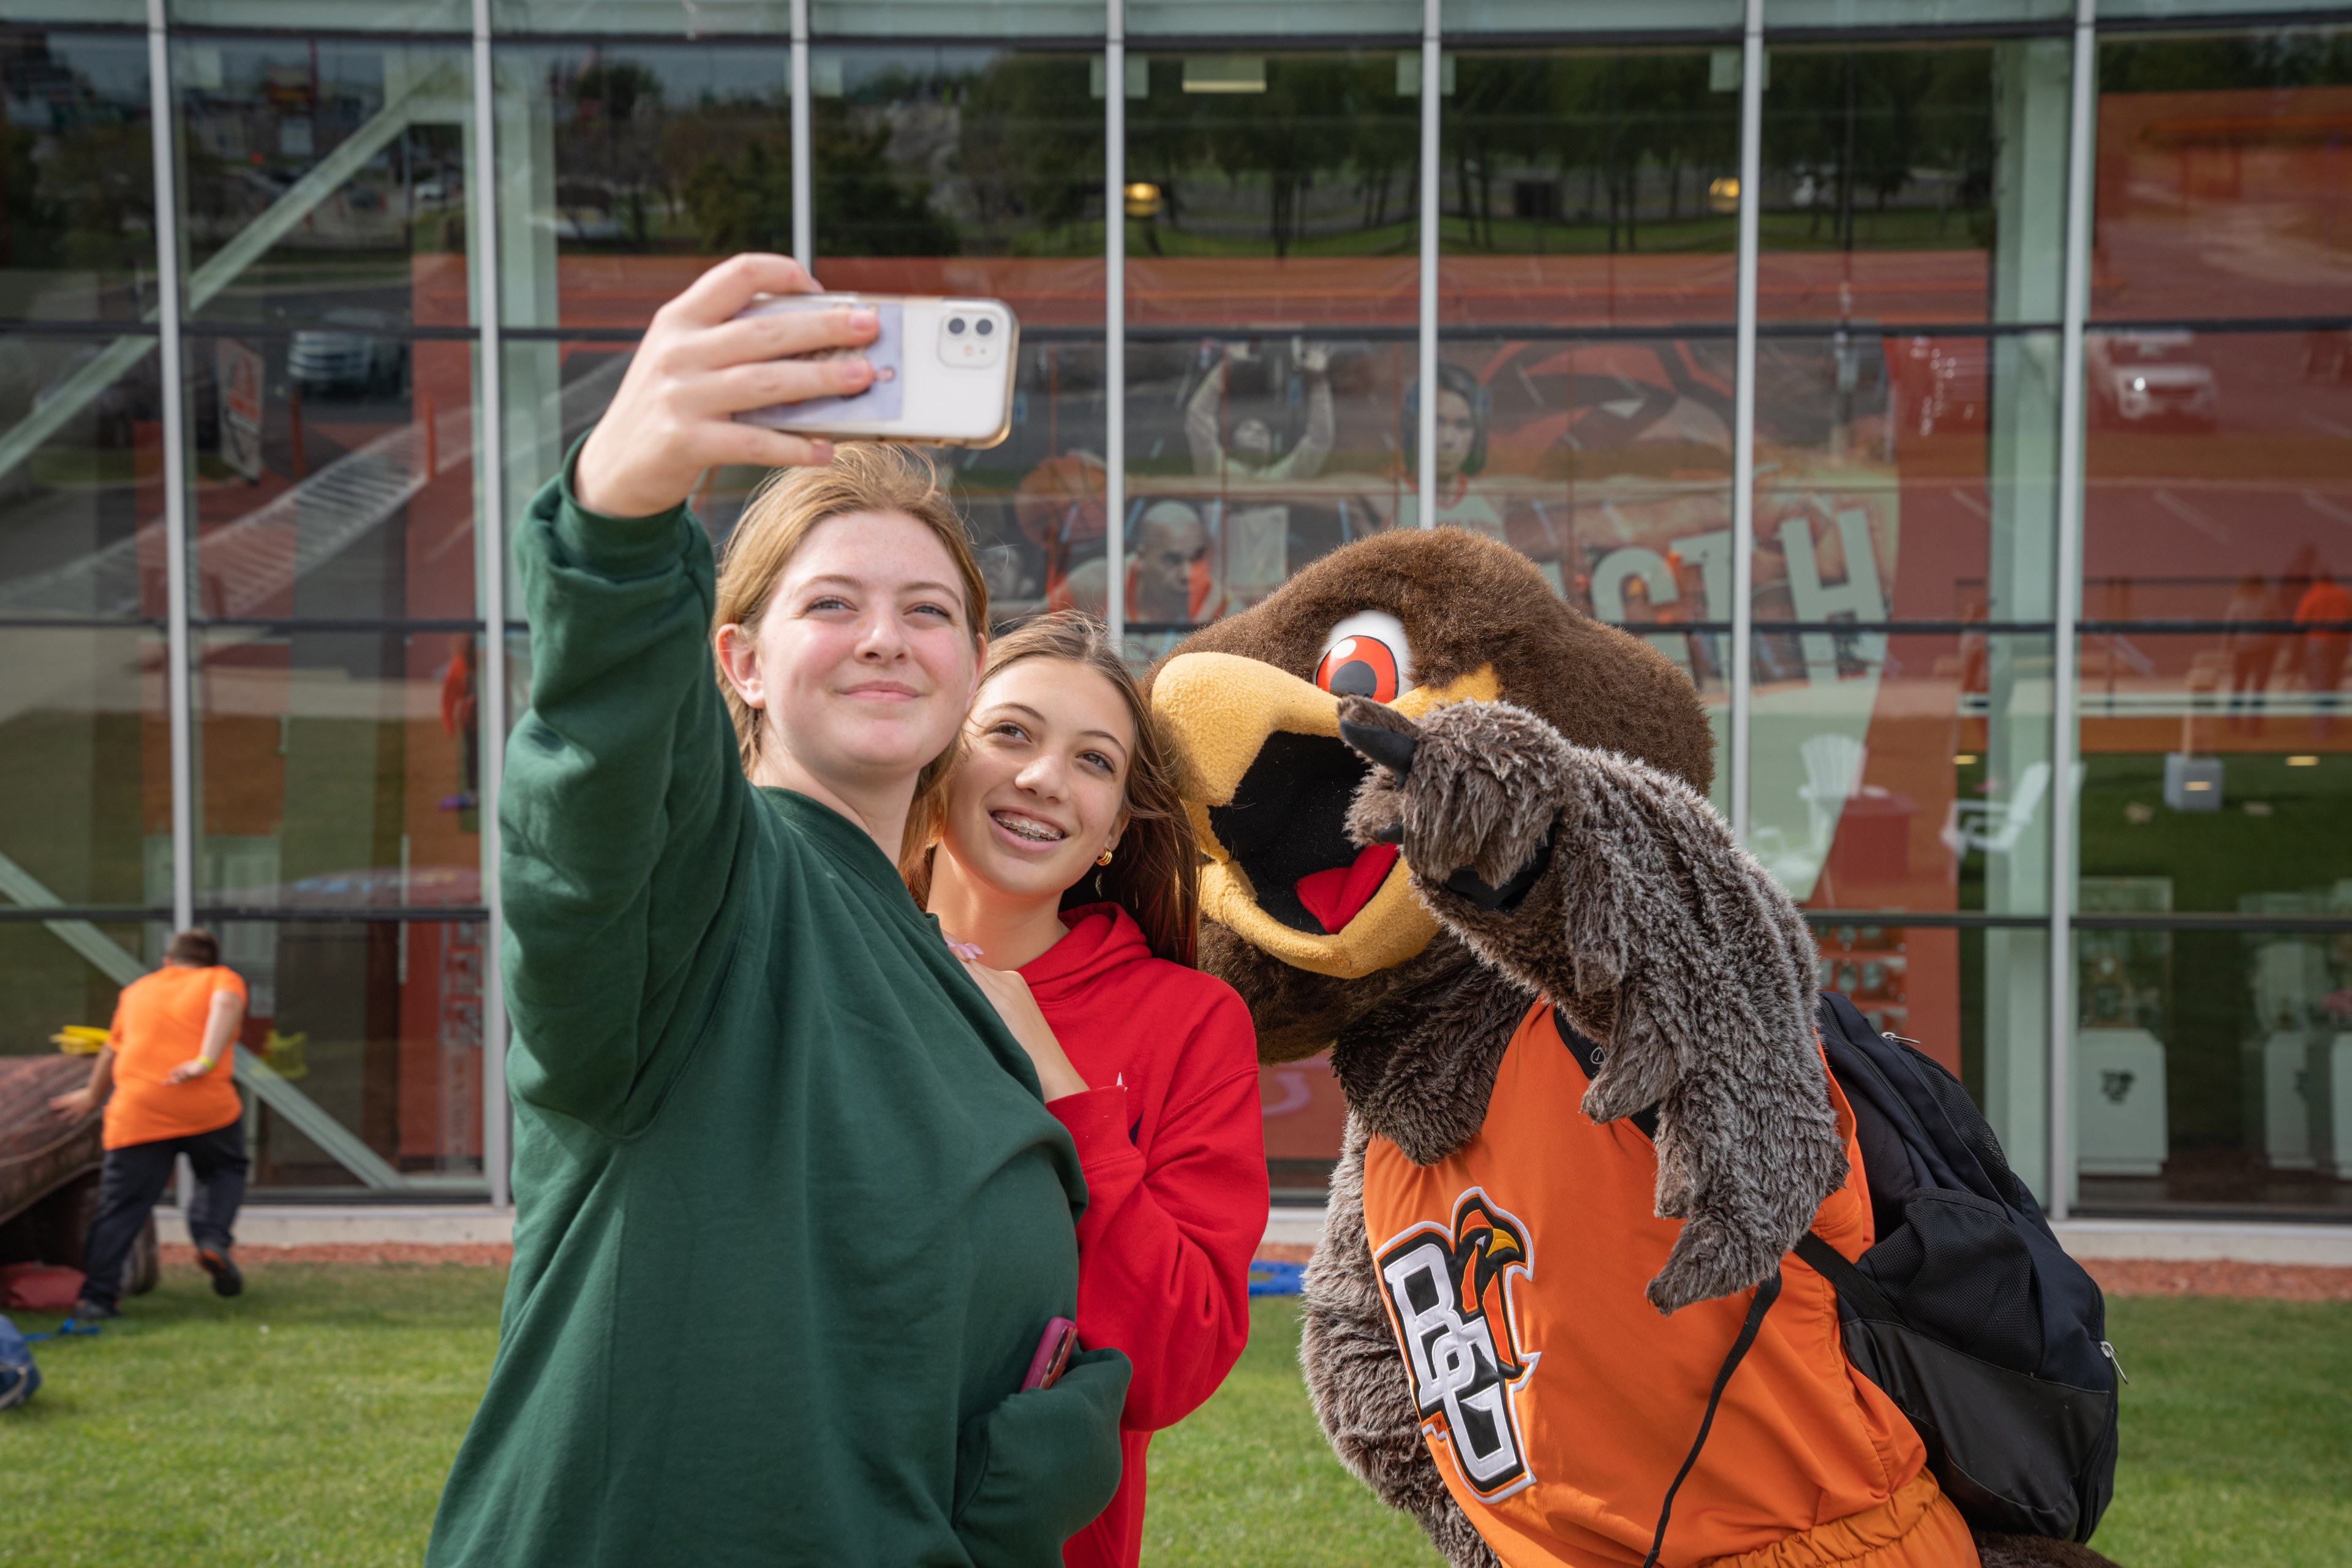 Two young ladies take a picture with a costumed mascot